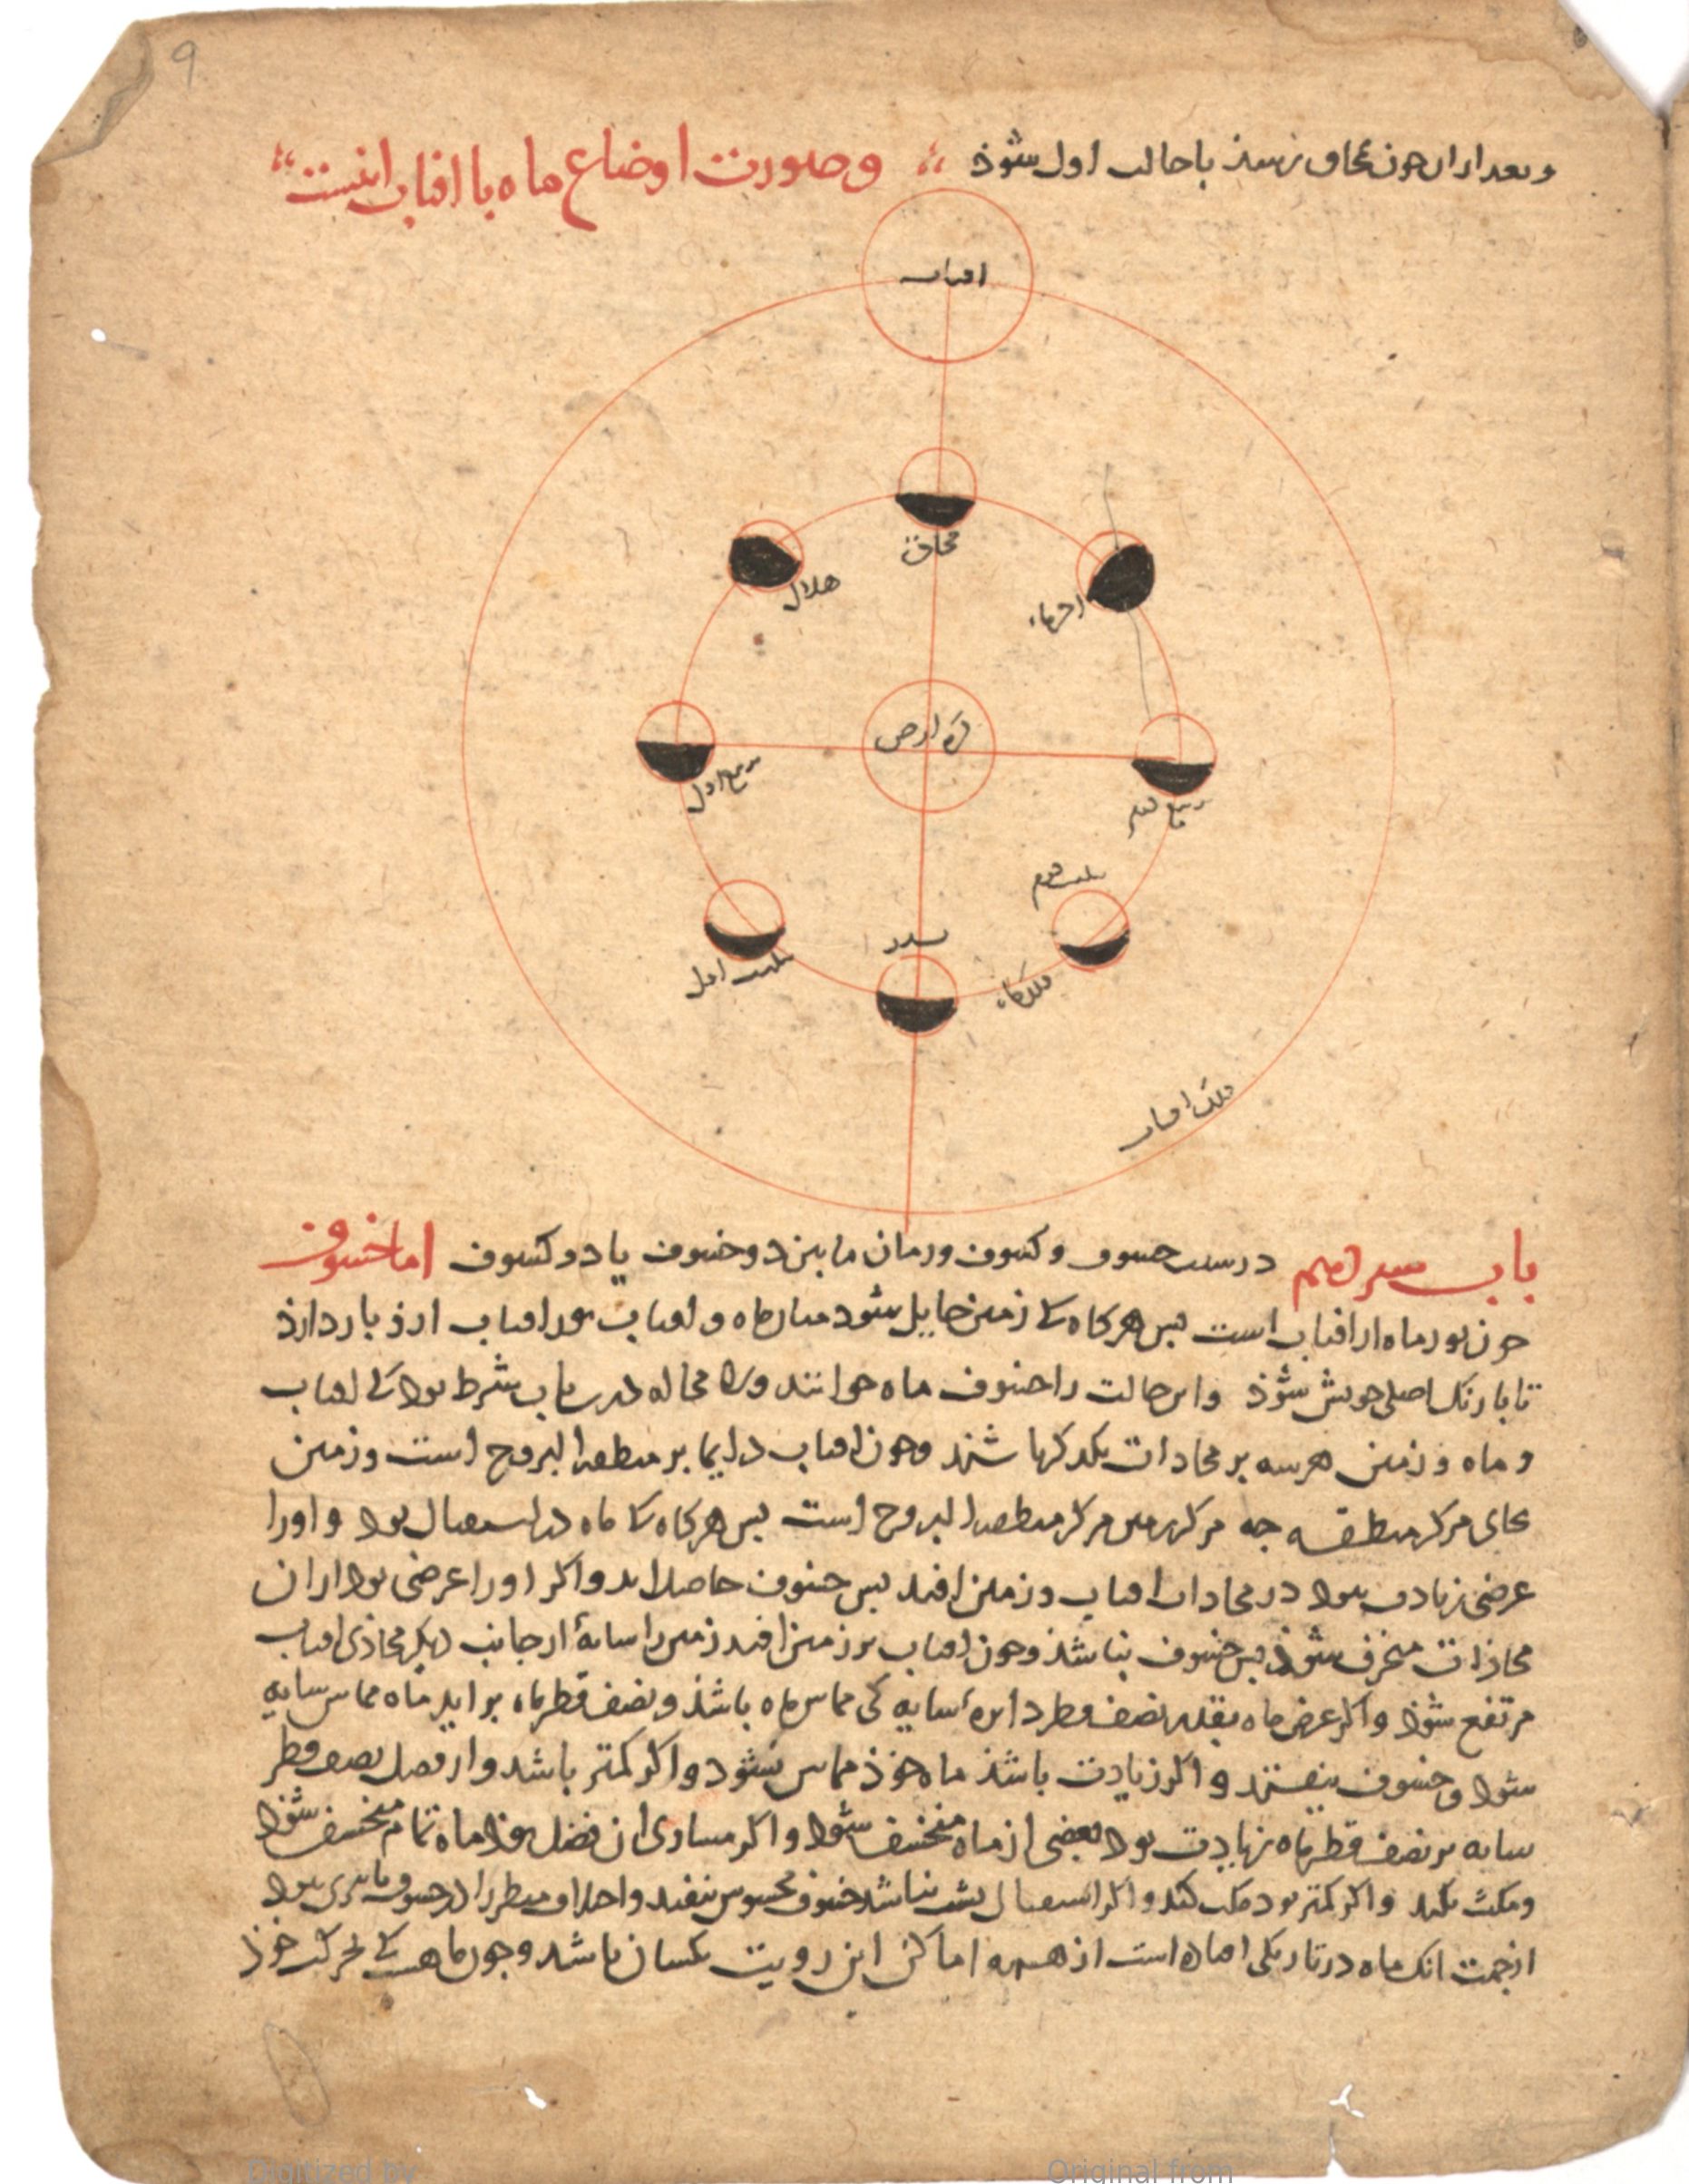 manuscript page of paper with persian writing in black and red inks above and below a diagram of the phases of the moon